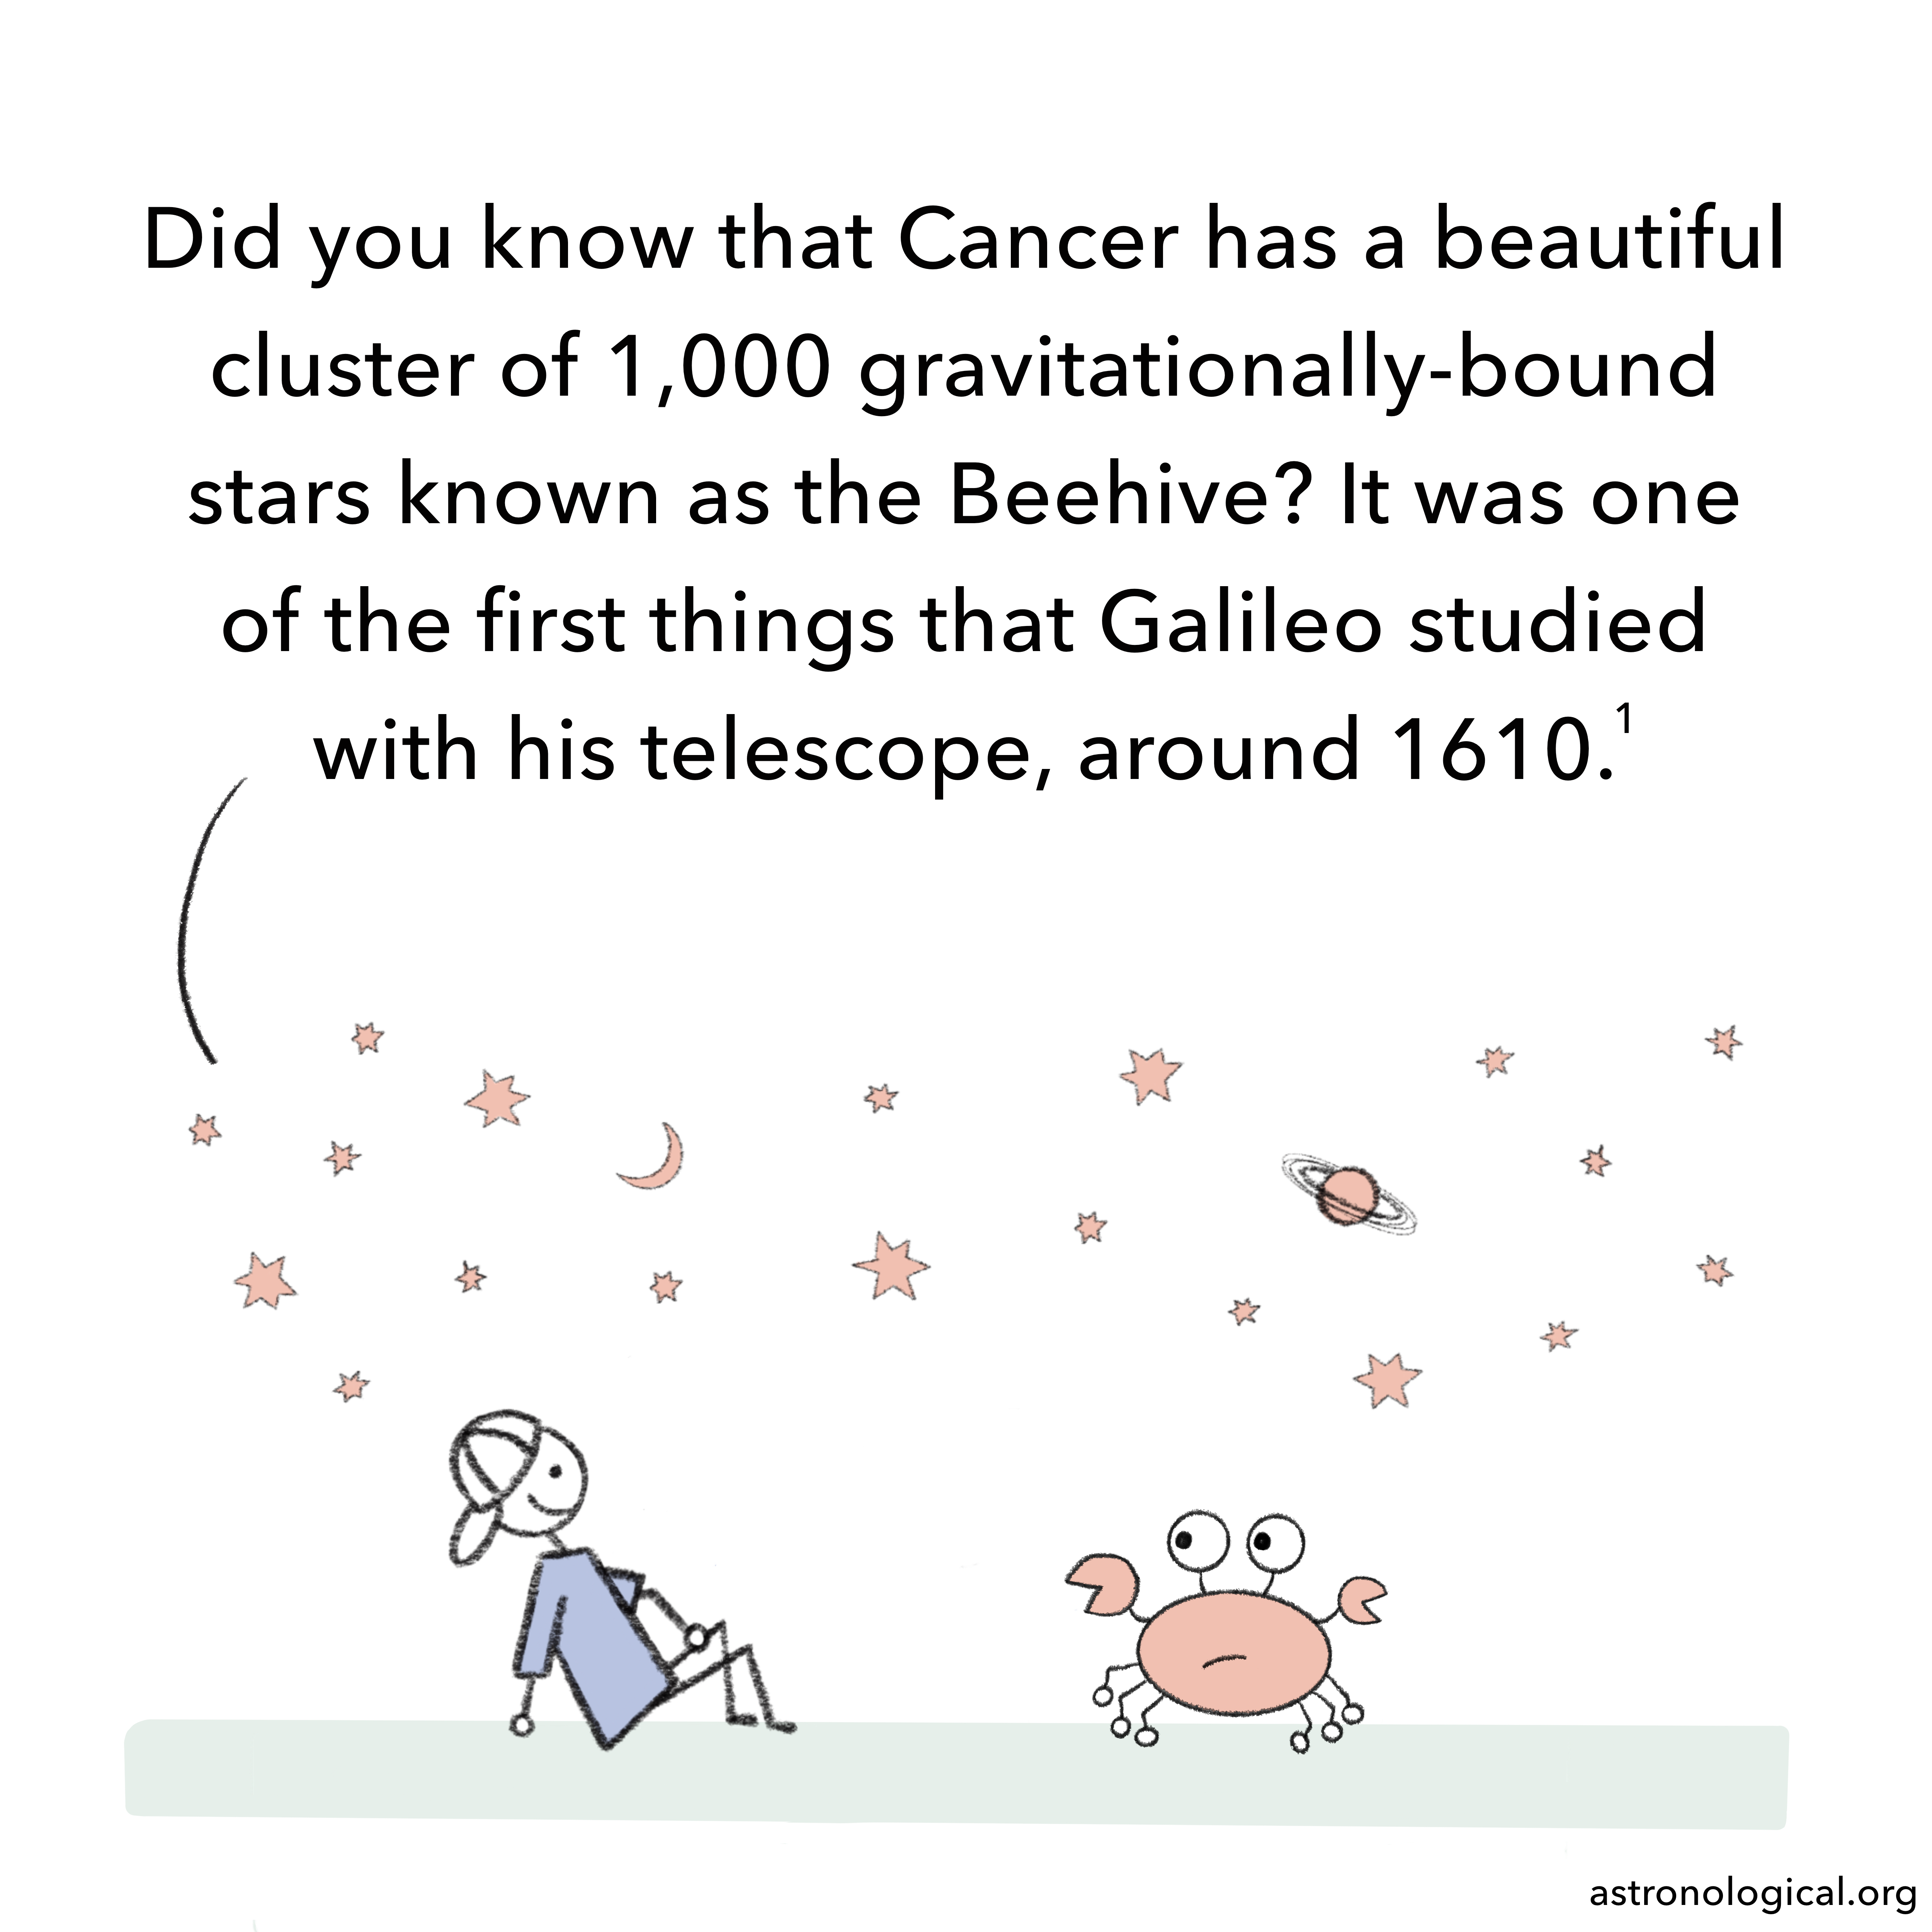 The guy adds: Did you know that Cancer has a beautiful cluster of 1,000 gravitationally-bound stars known as the Beehive? It was one of the first things that Galileo studied with his telescope, around 1610.